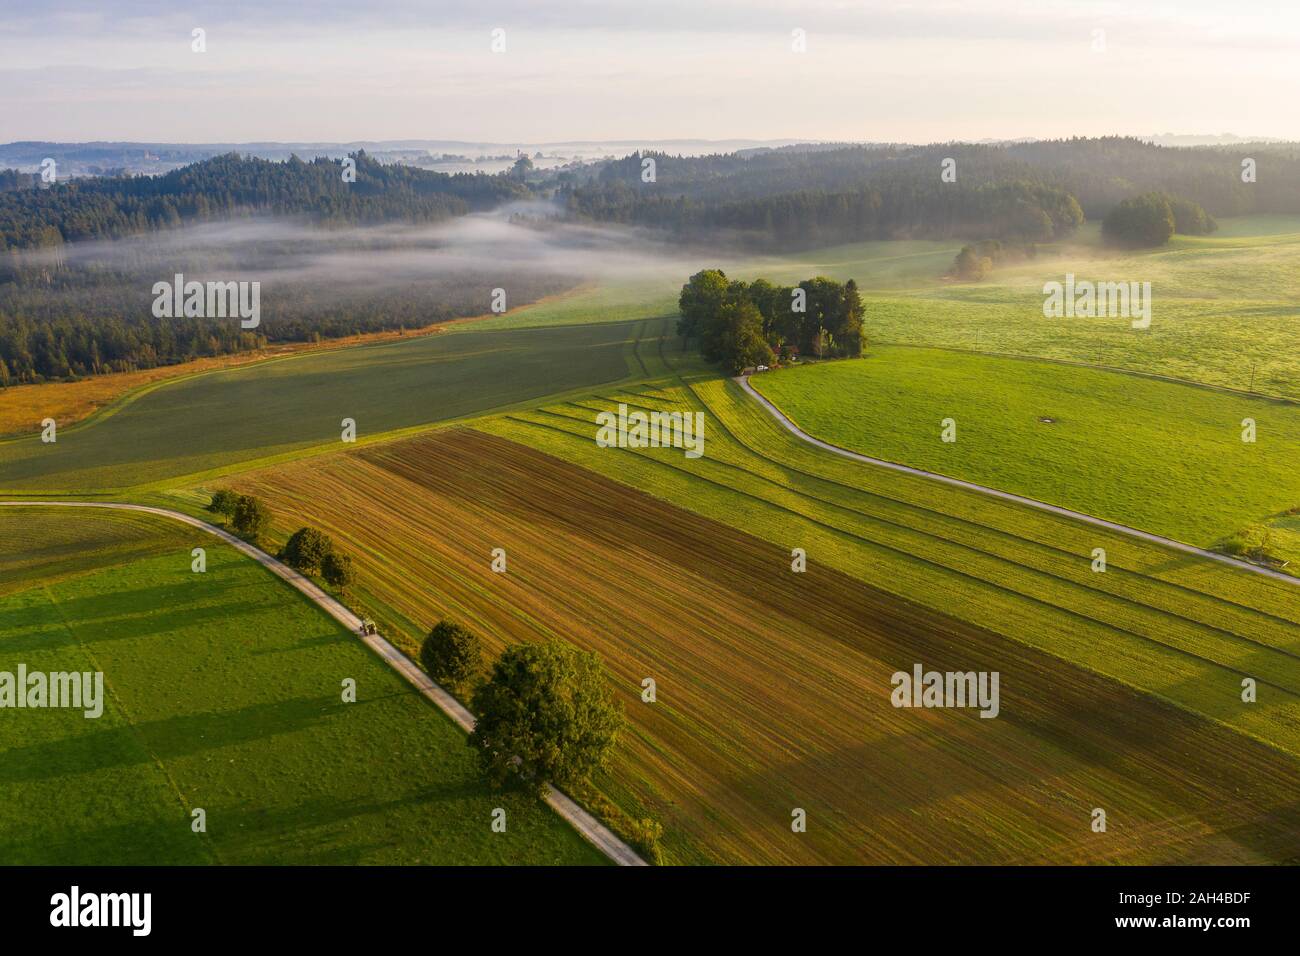 Germany, Bavaria, Dietramszell, Aerial view of countryside fields at foggy dawn Stock Photo